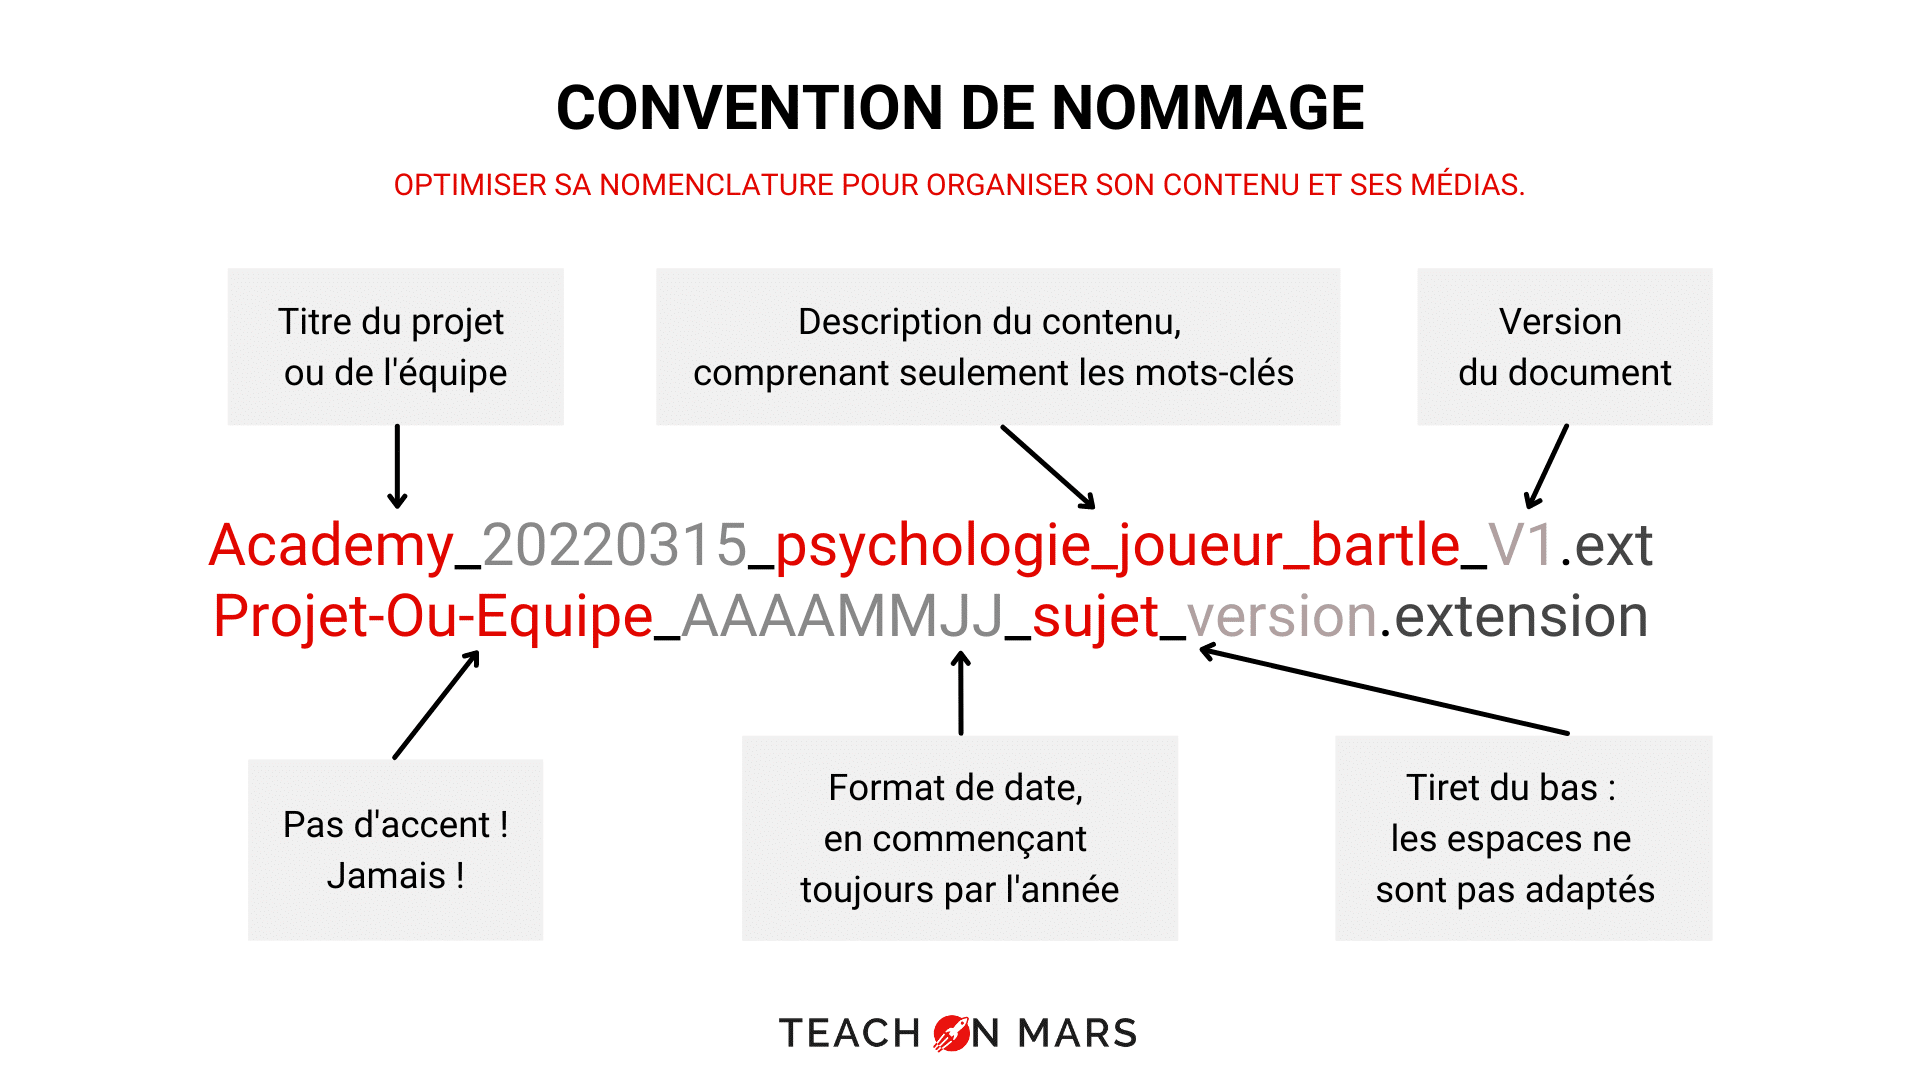 infographie-convention-nommage-bibliotheque-contenu-durable